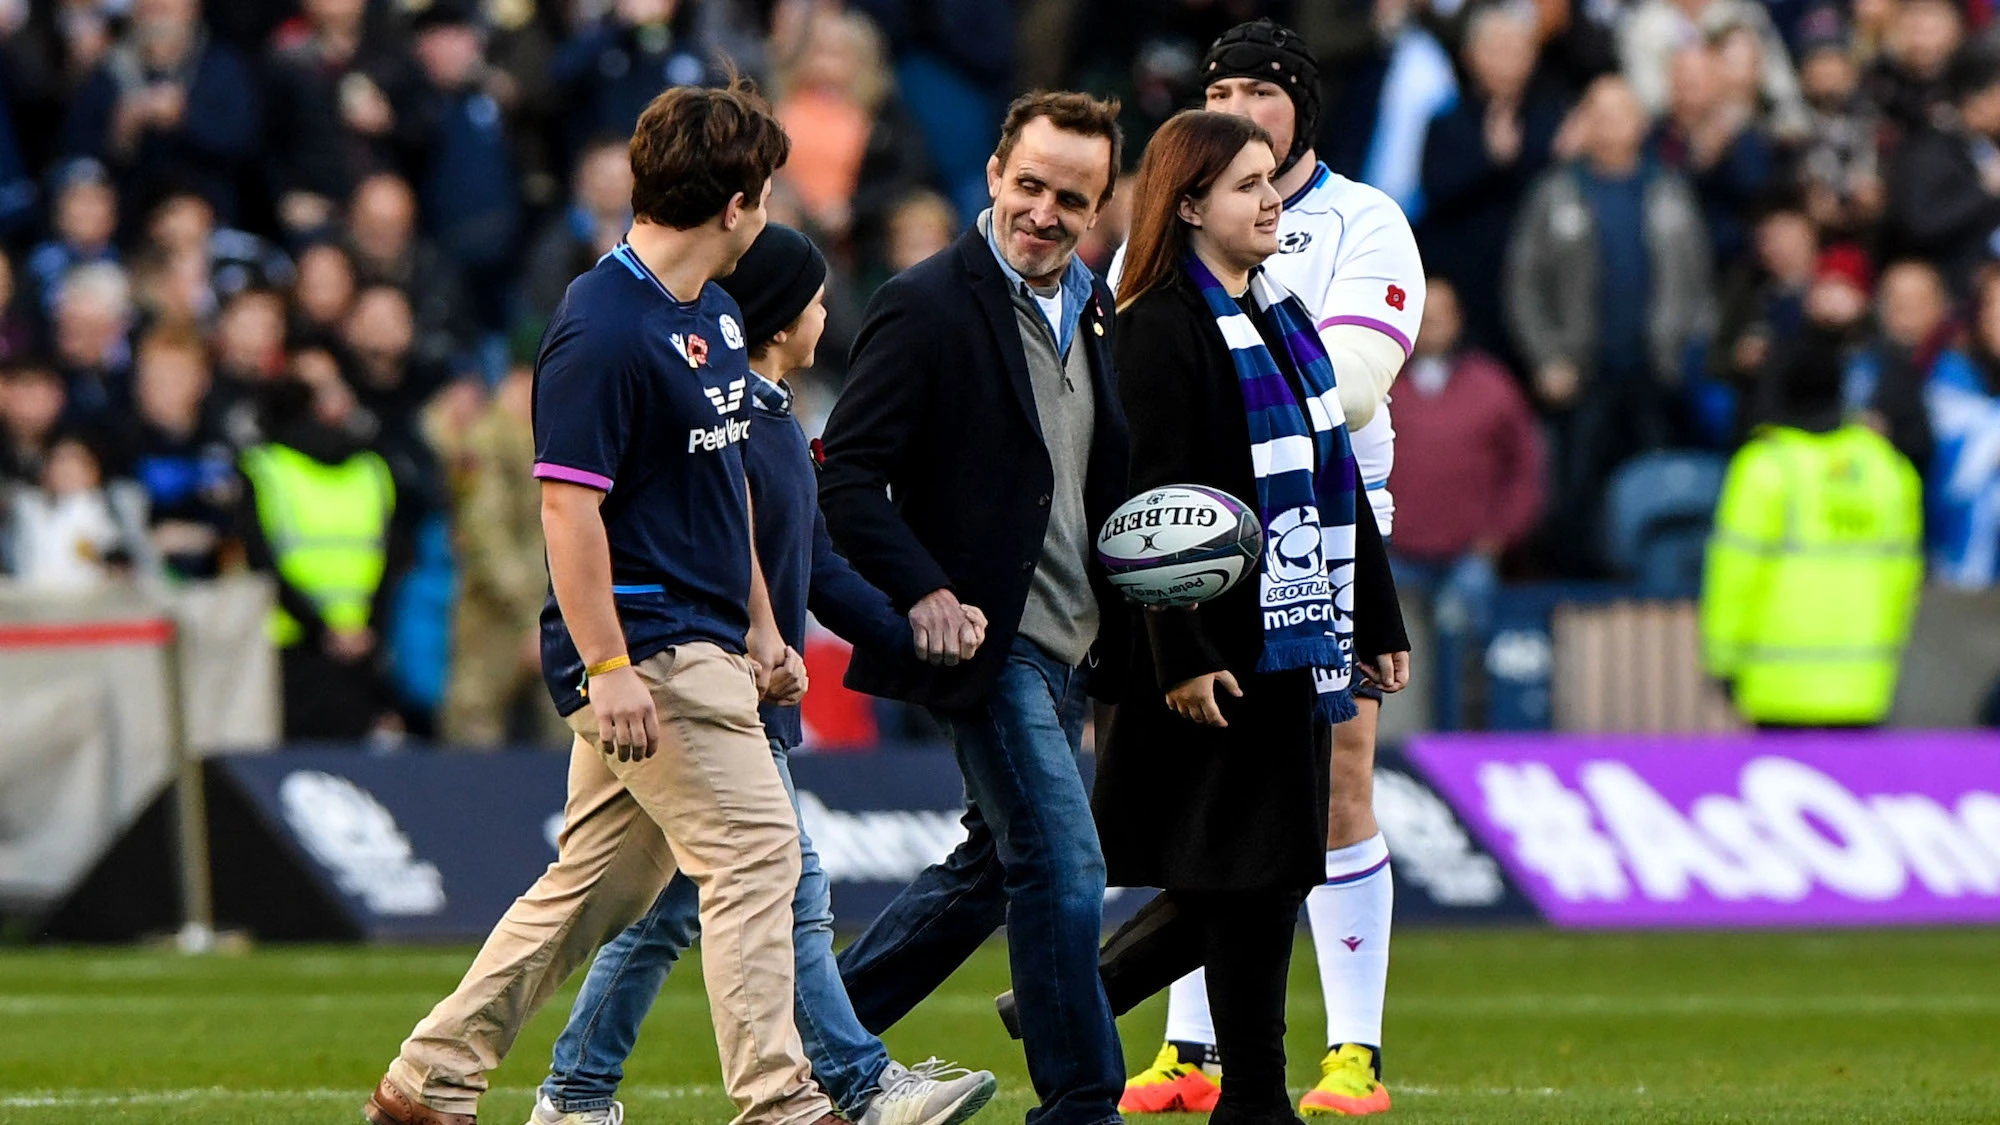 Tom Smith walks out into Murrayfield with the match ball after being inducted into the Scottish Rugby Hall of Fame 13/11/2021